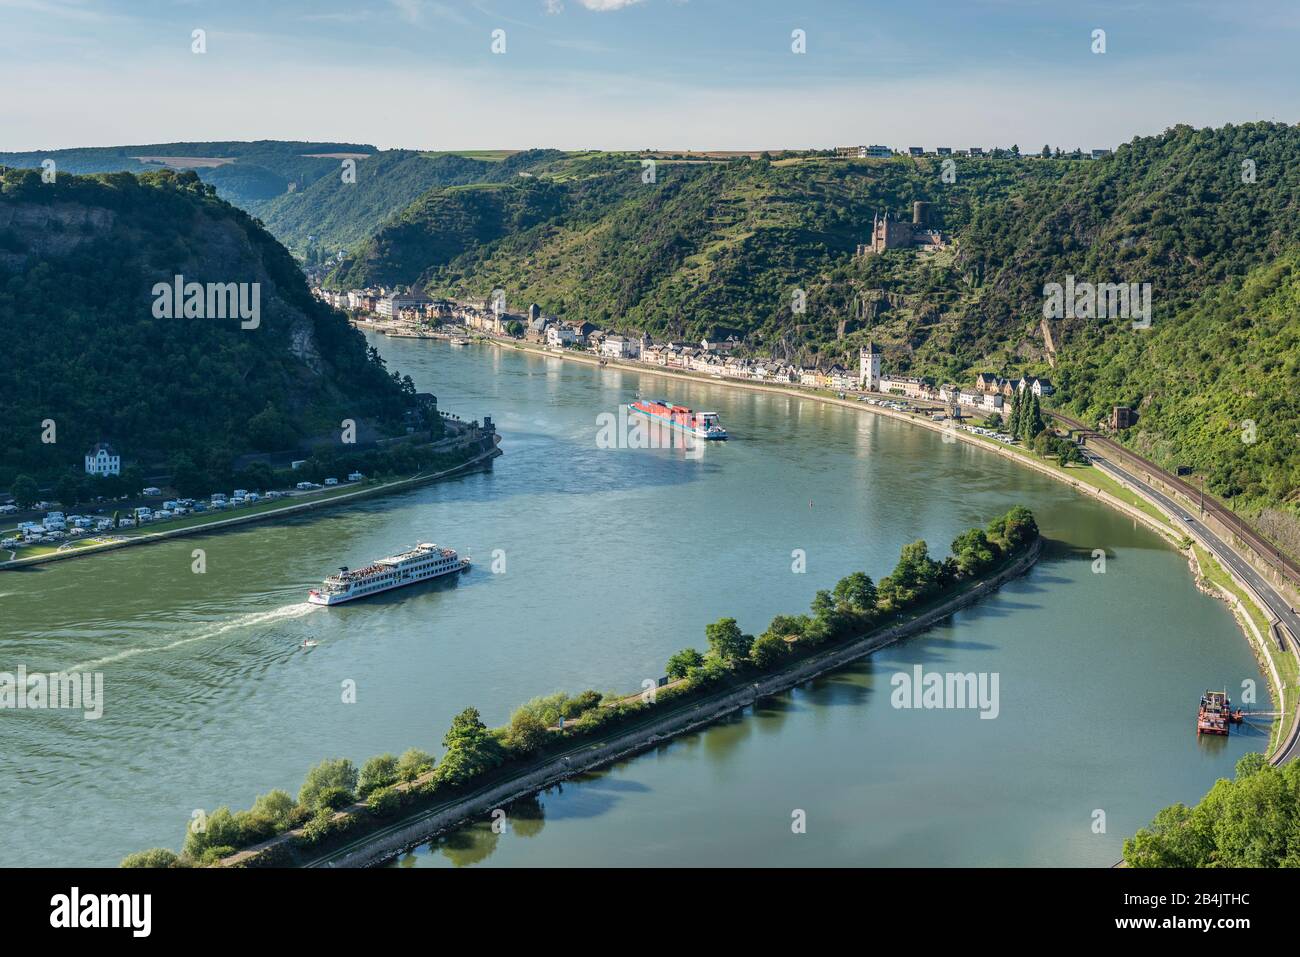 Panoramic view of the Middle Rhine from the Loreley, to see: St. Goarshausen, castle Katz, castle mouse, campsite Loreleyblick, harbor, UNESCO World Heritage Upper Middle Rhine Valley, Stock Photo